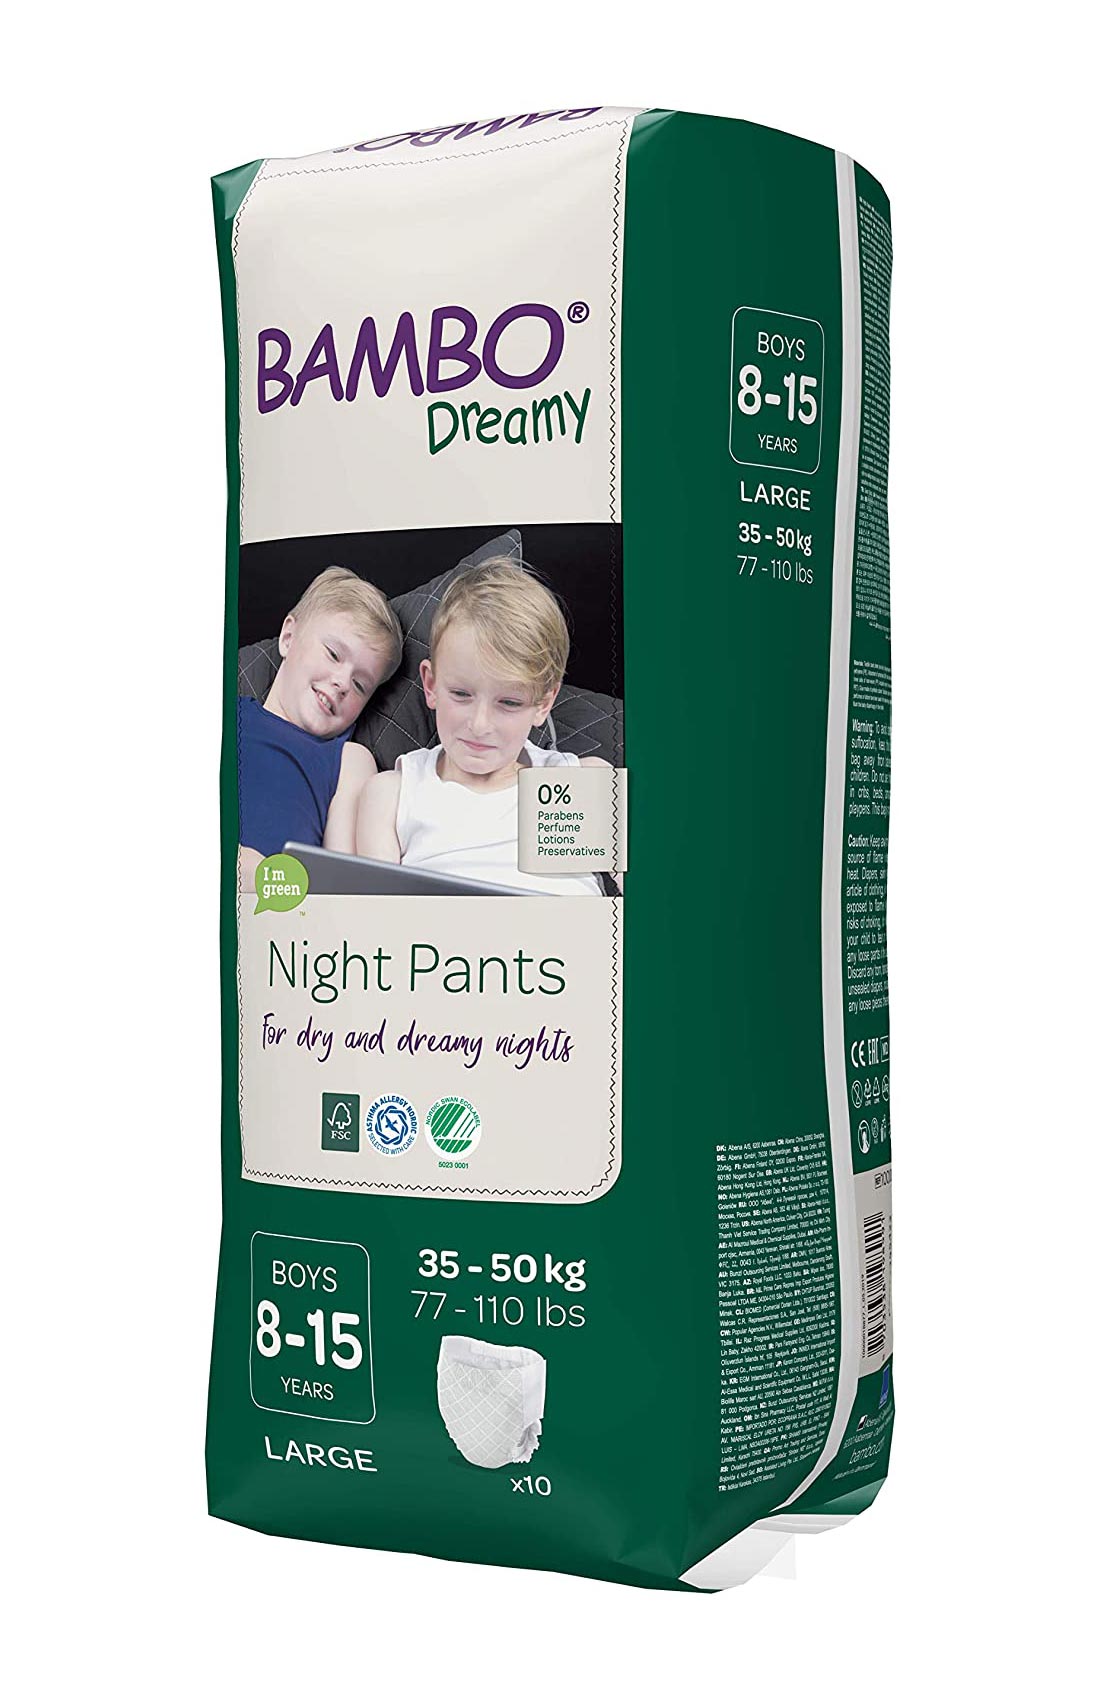 Bambo Dreamy - Night Pants Junge / Boy - 8 bis 15 Jahre (35-50 kg) - 10 St. Pack